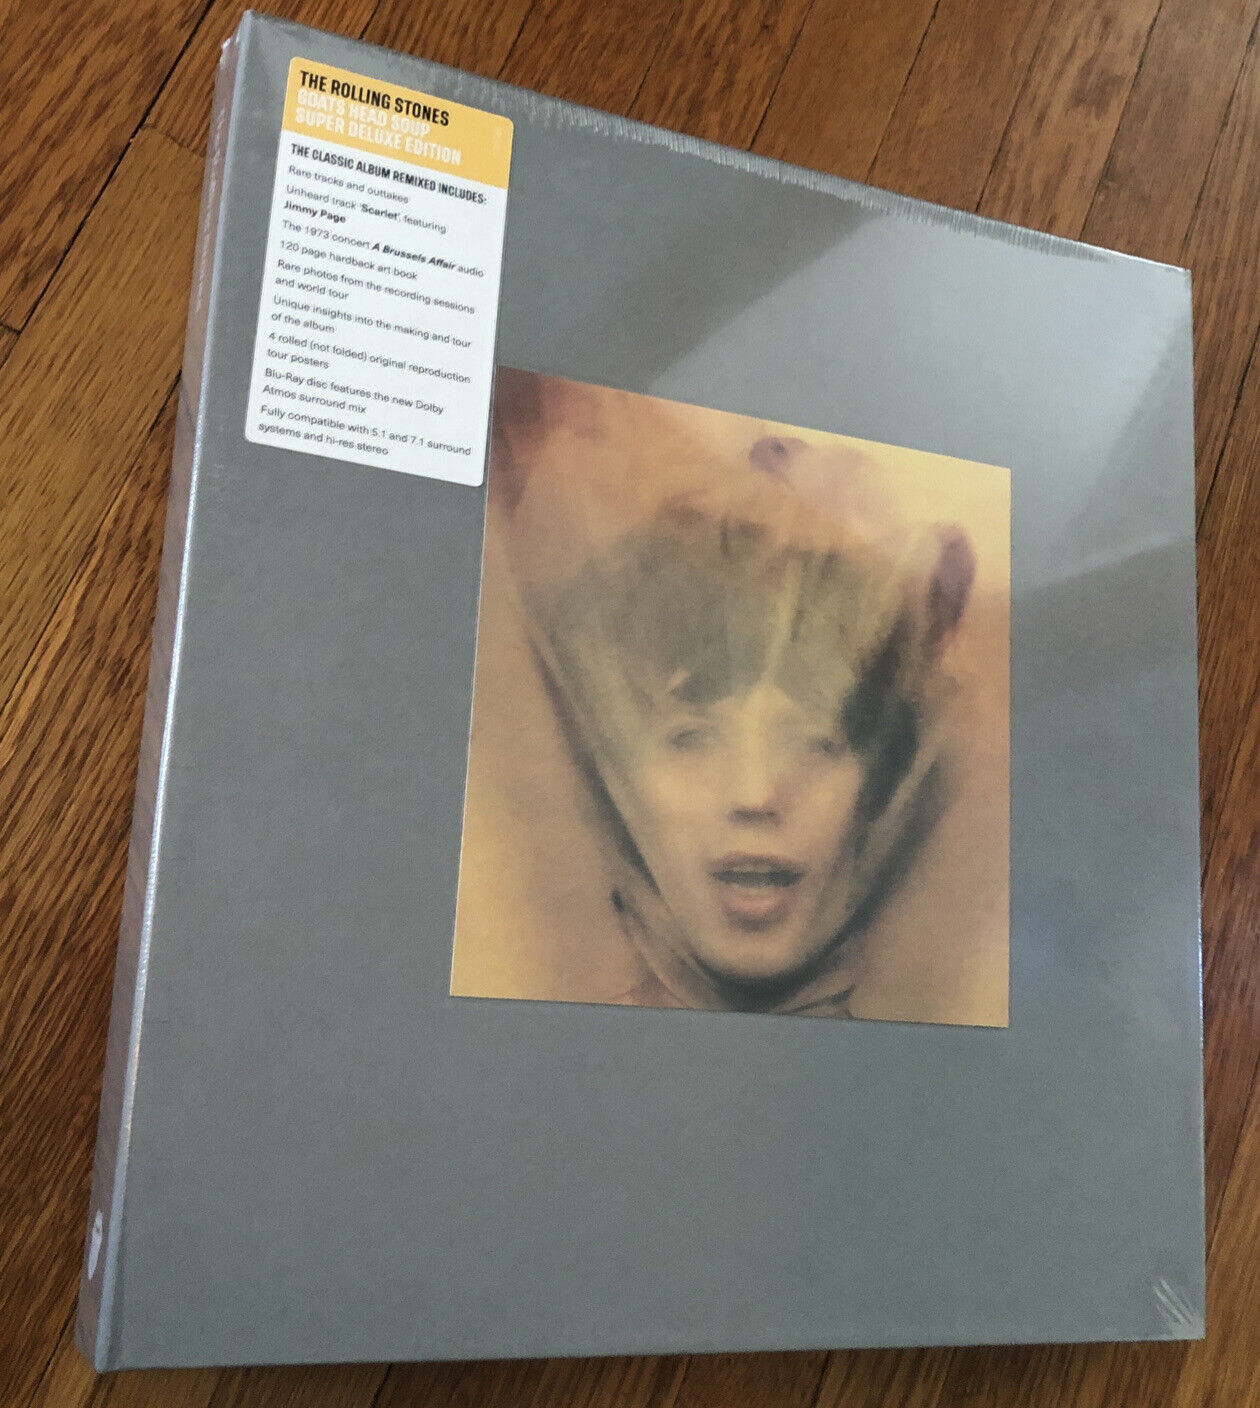 Rolling Stones Goats Head Soup Super Deluxe Edition 3 CD 2020, Mick Jagger  🔥🎶